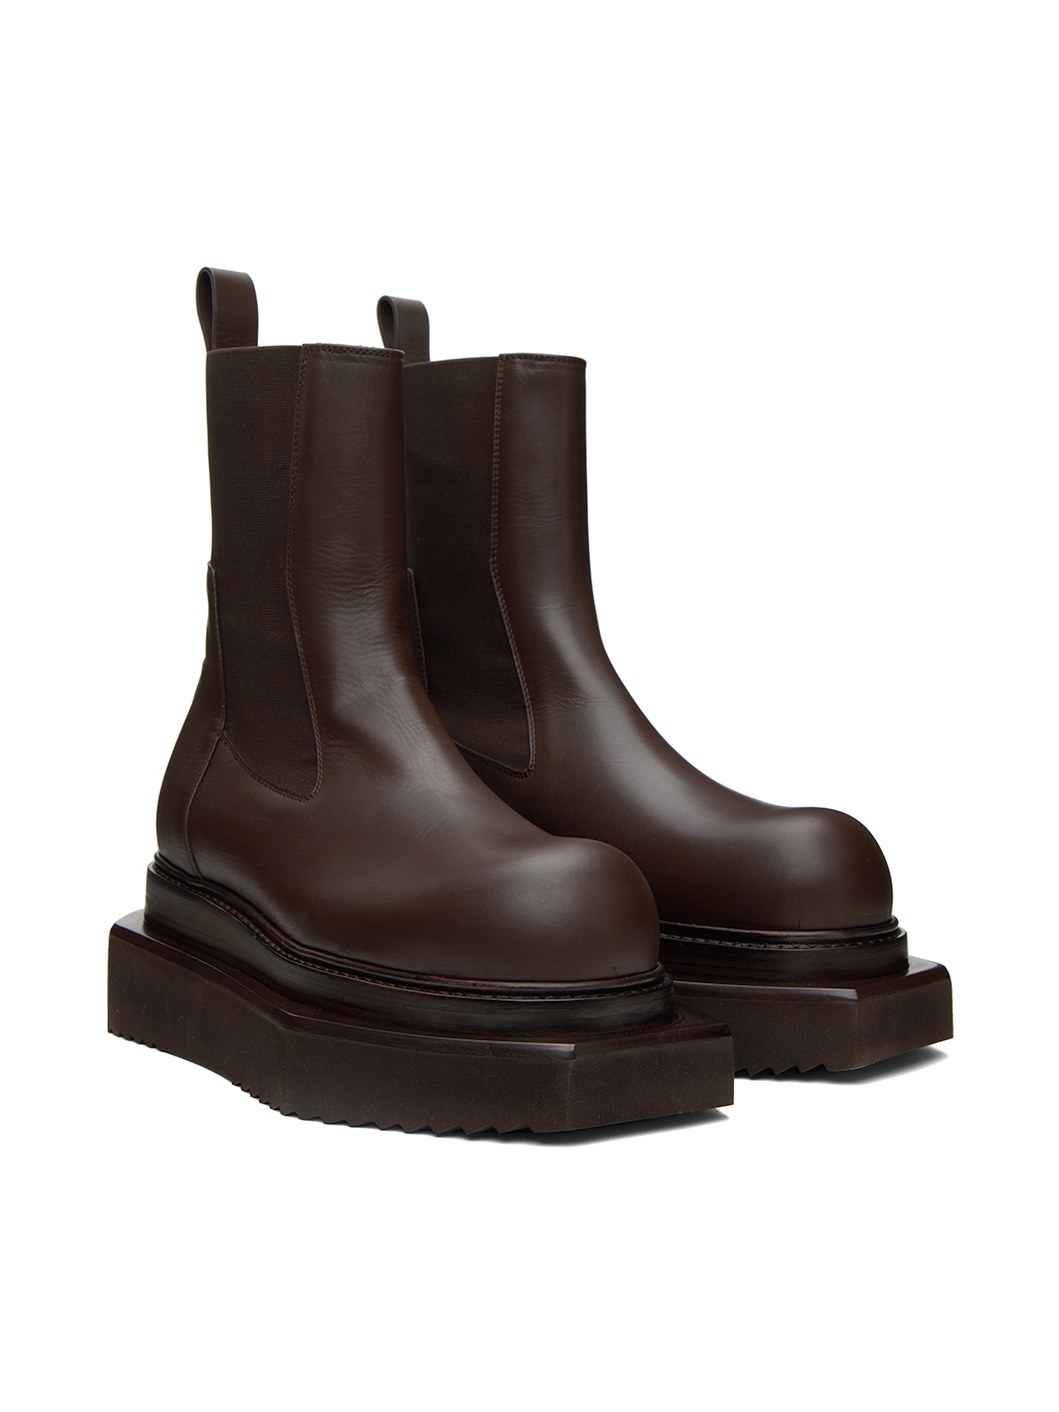 Brown Beatle Turbo Cyclops Boots - 4